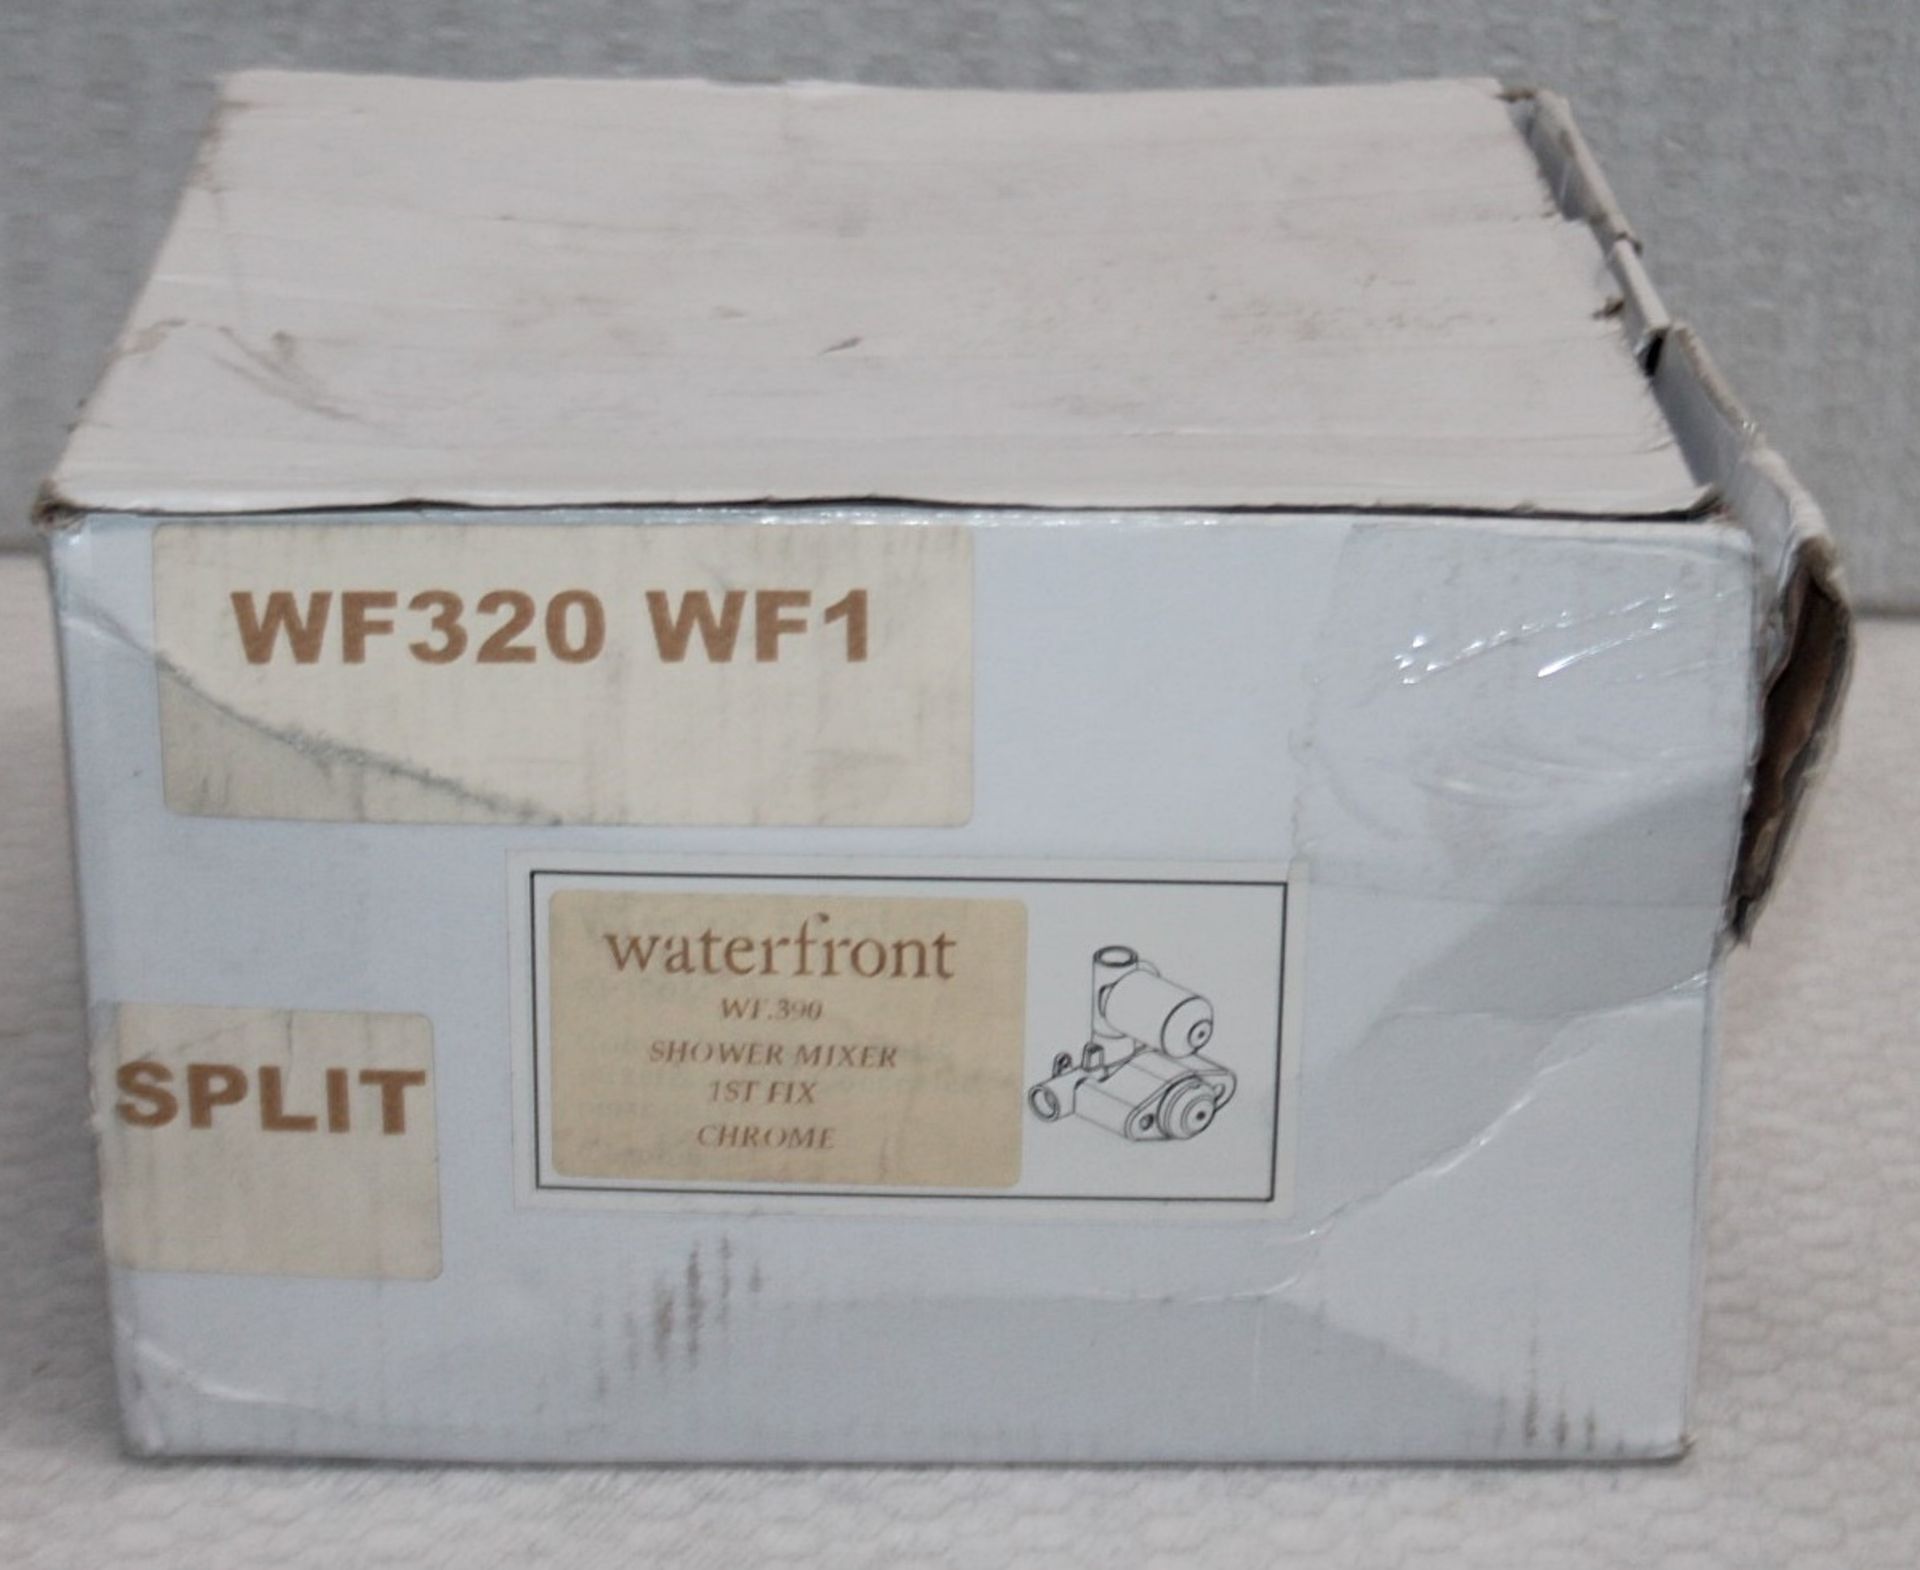 1 x WATERFRONT Bathroom Thermostatic Shower Mixer - Ref: WF320 - Unused Boxed Stock - RRP £505.00 - Image 4 of 5